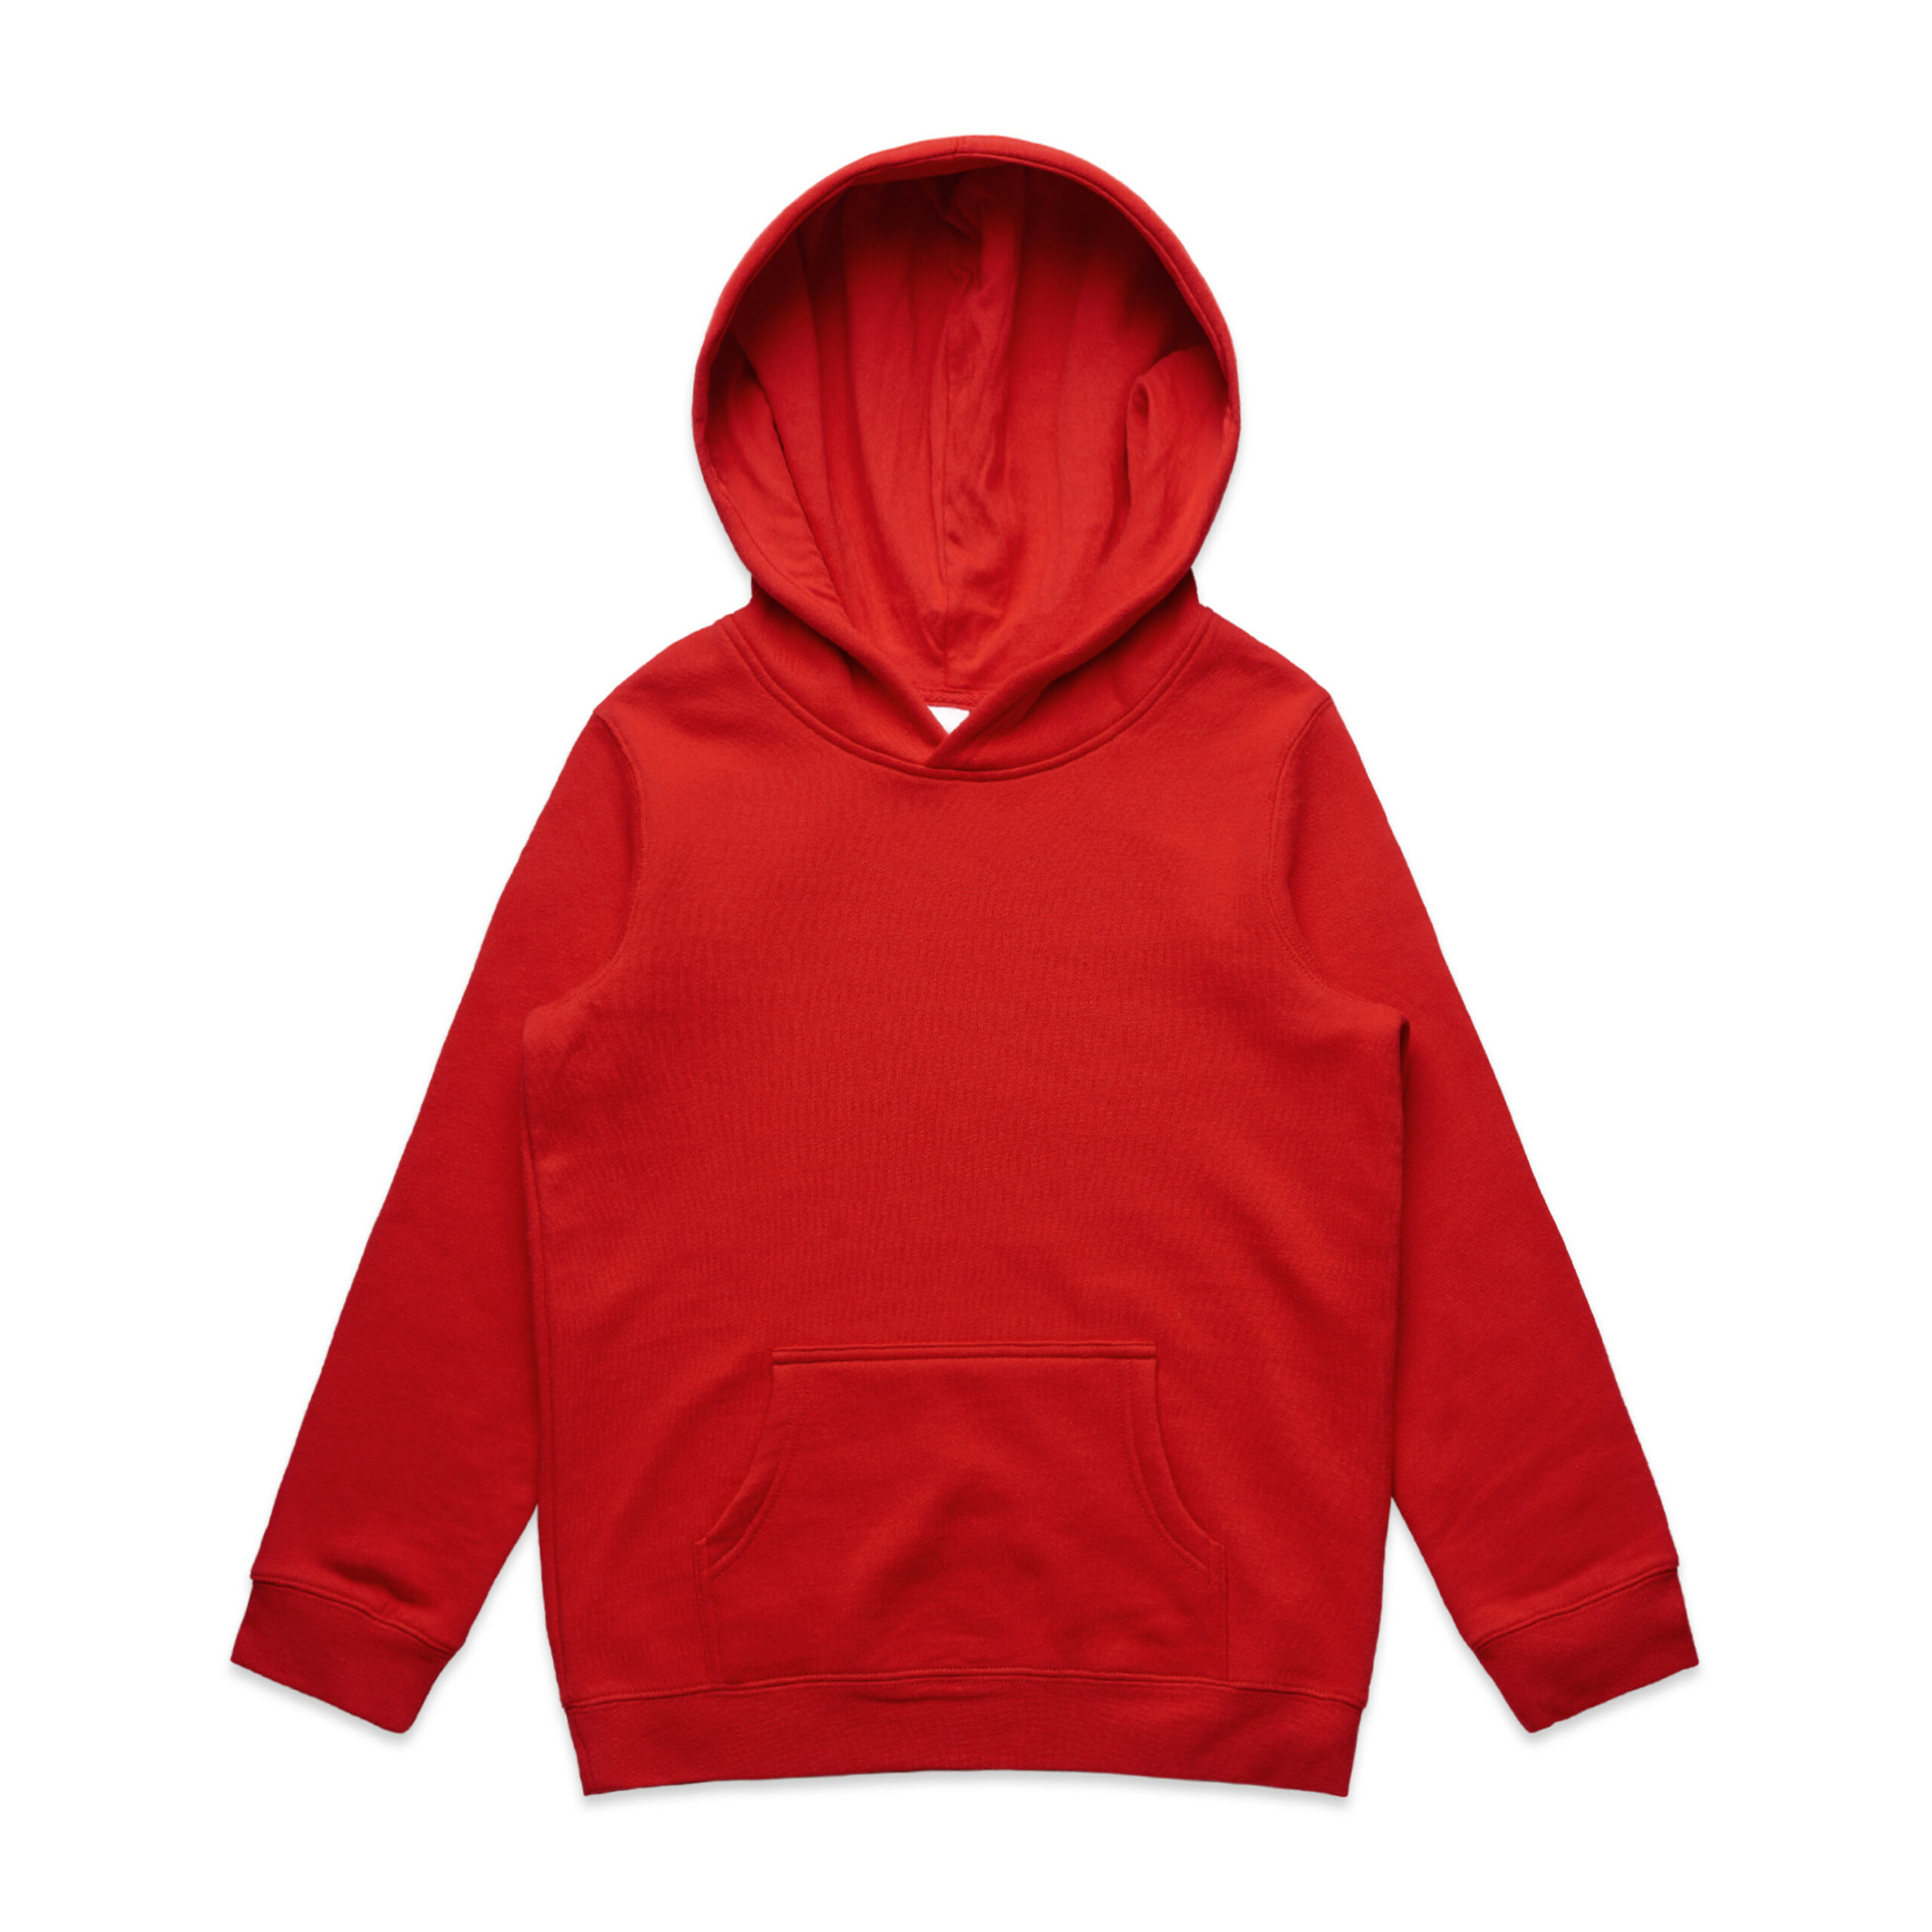 3033_YOUTH_SUPPLY_HOOD_RED__87402